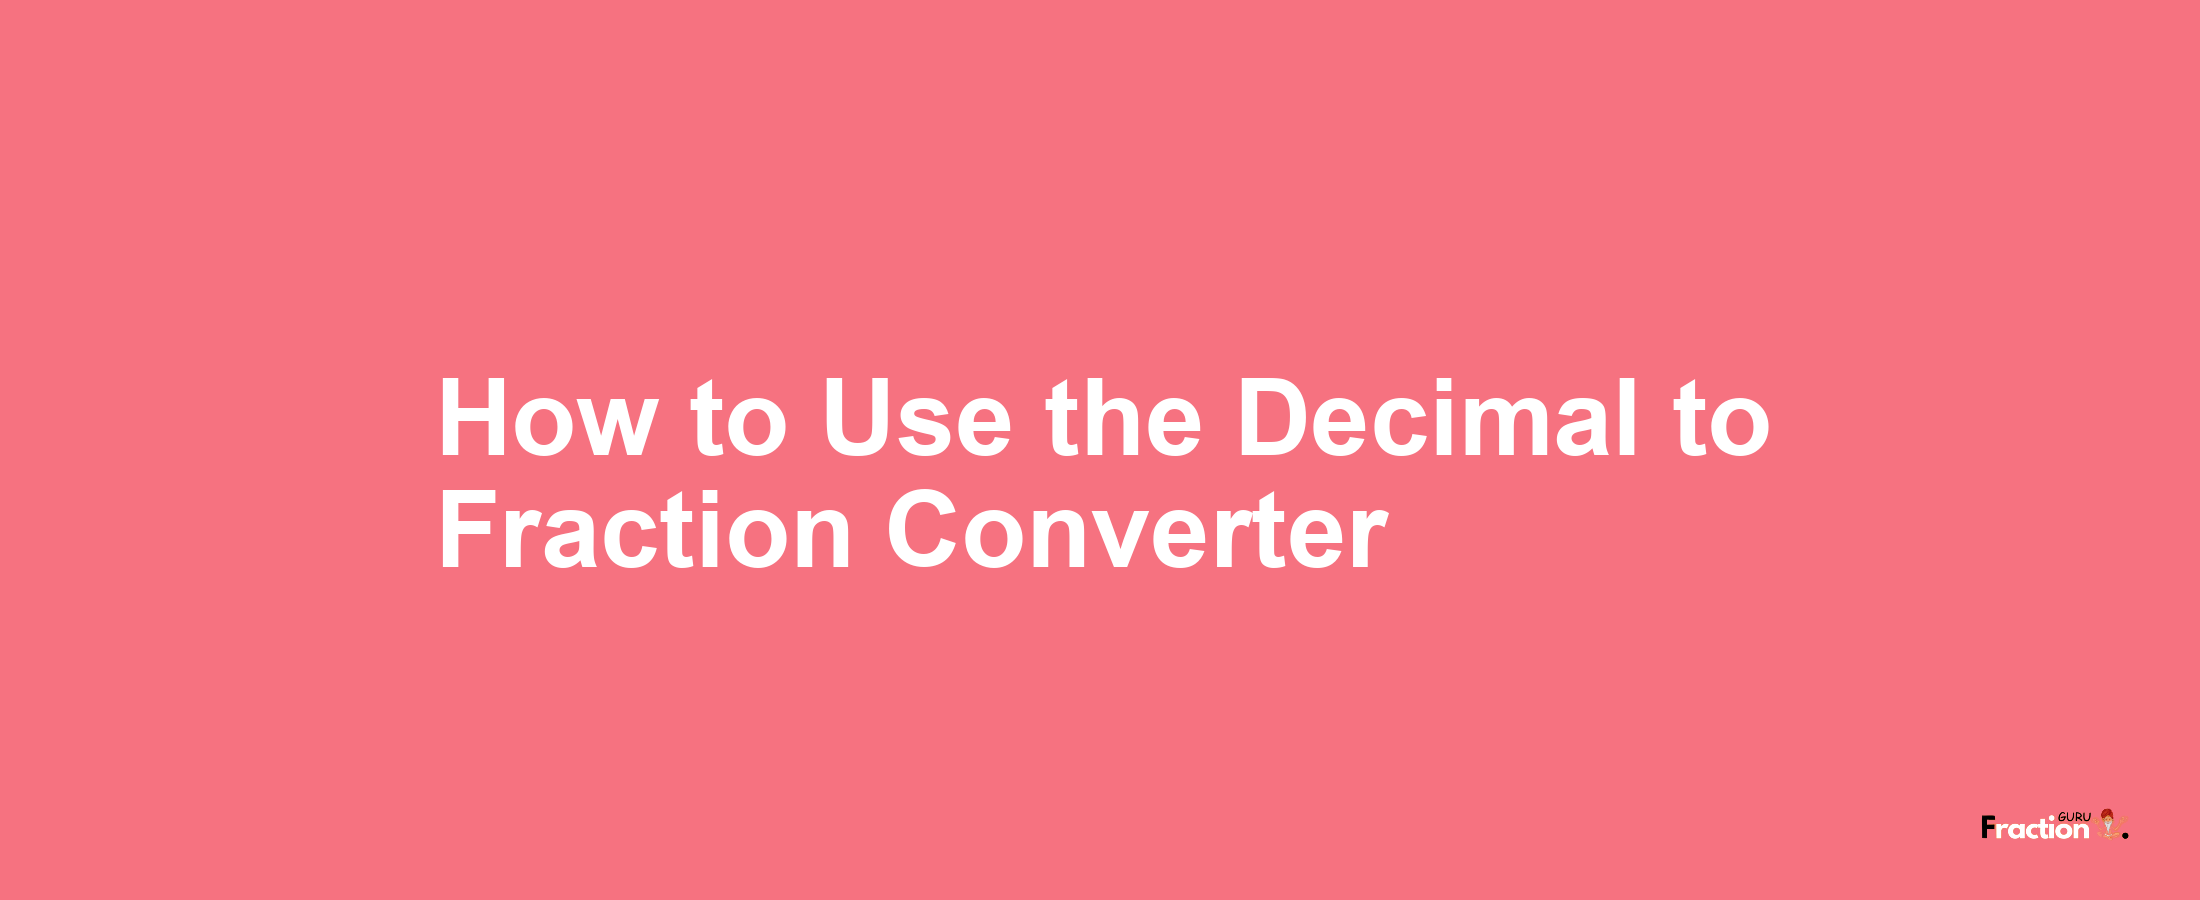 How to Use the Decimal to Fraction Converter